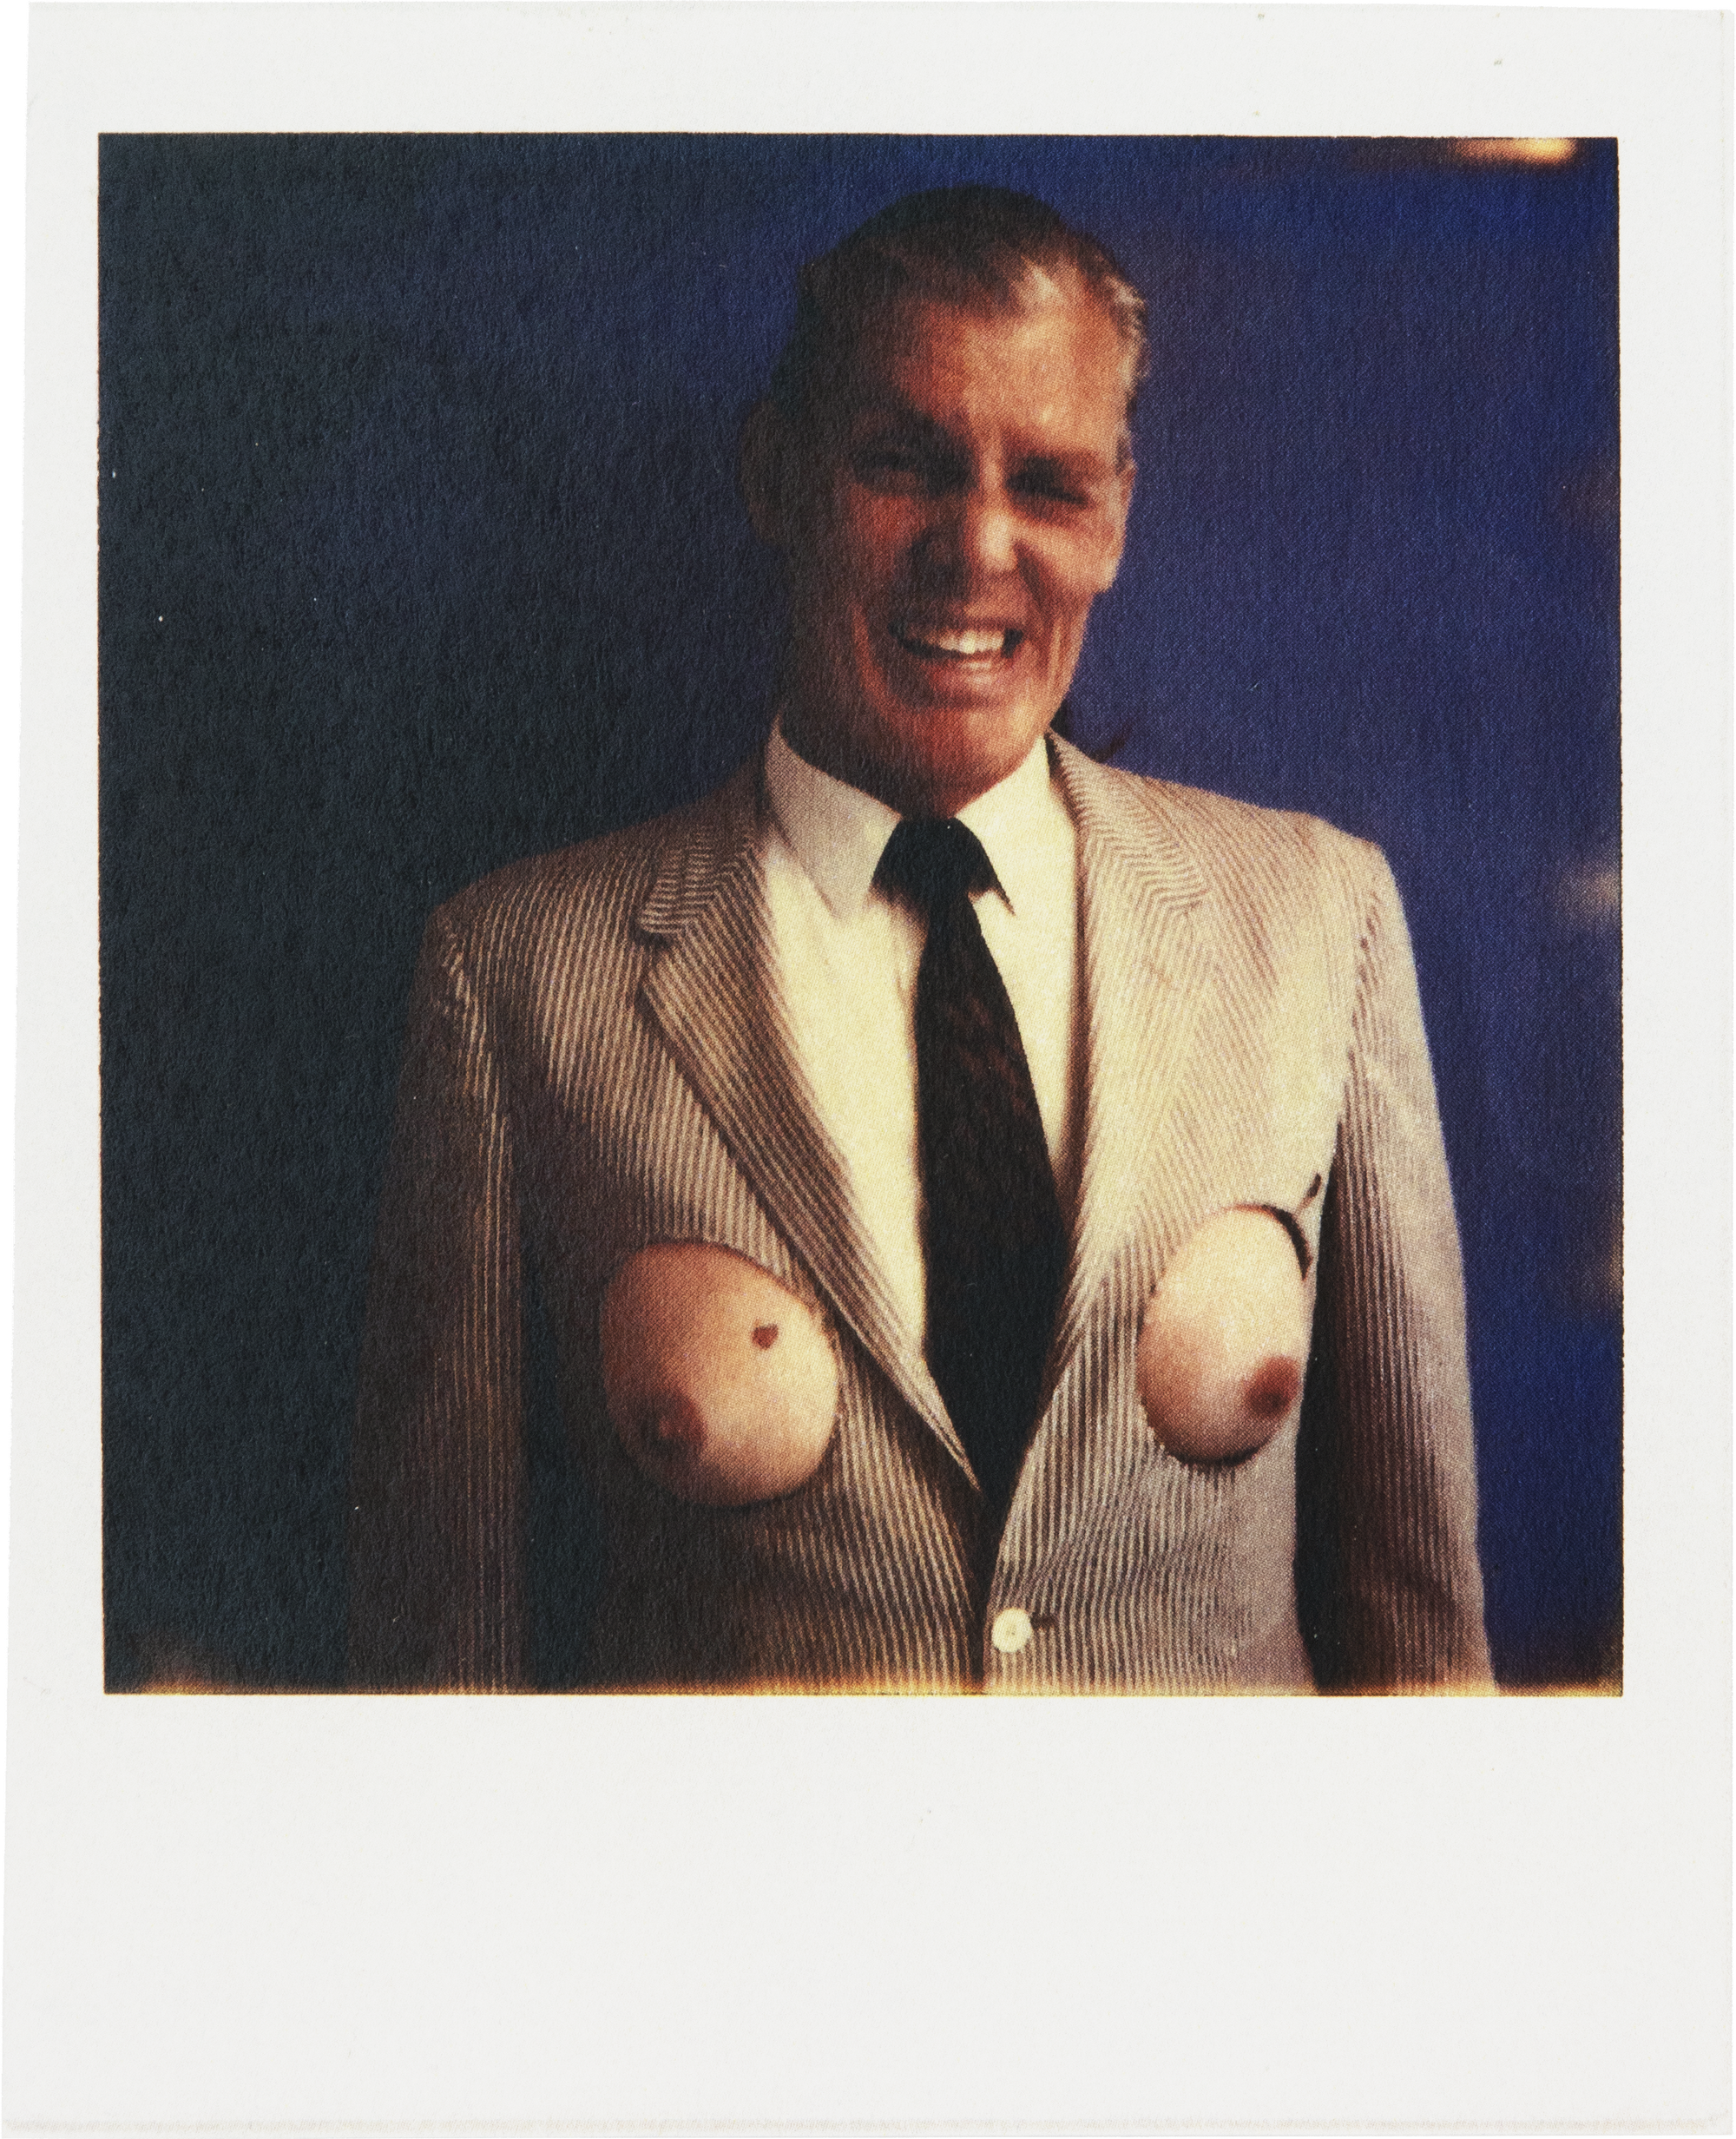 A masculine figure wears a suit where holes are cut symmetrically to reveal full breasts.